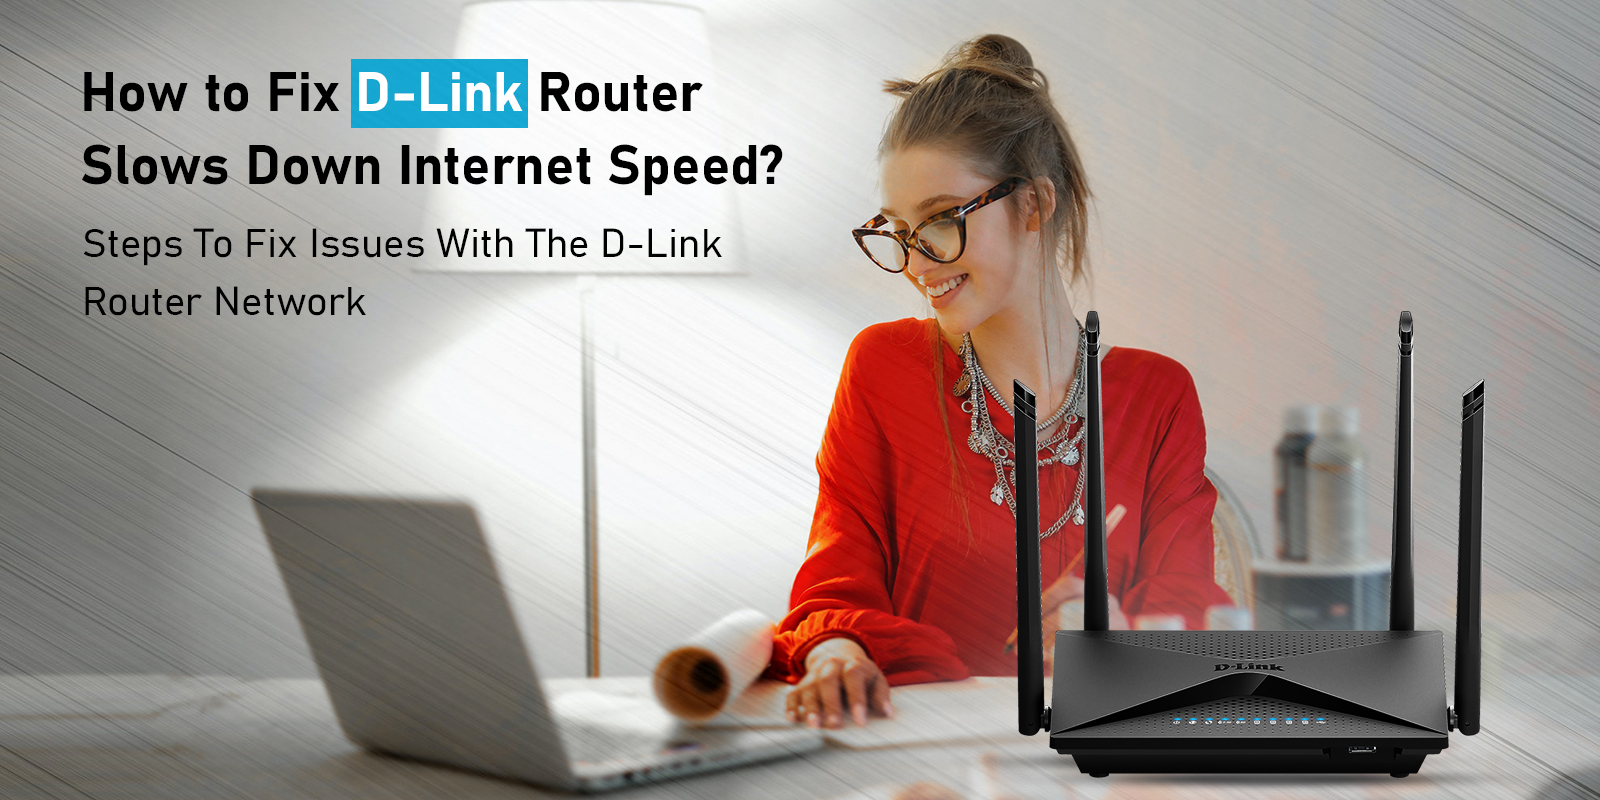 D-Link Router Slows Down Internet